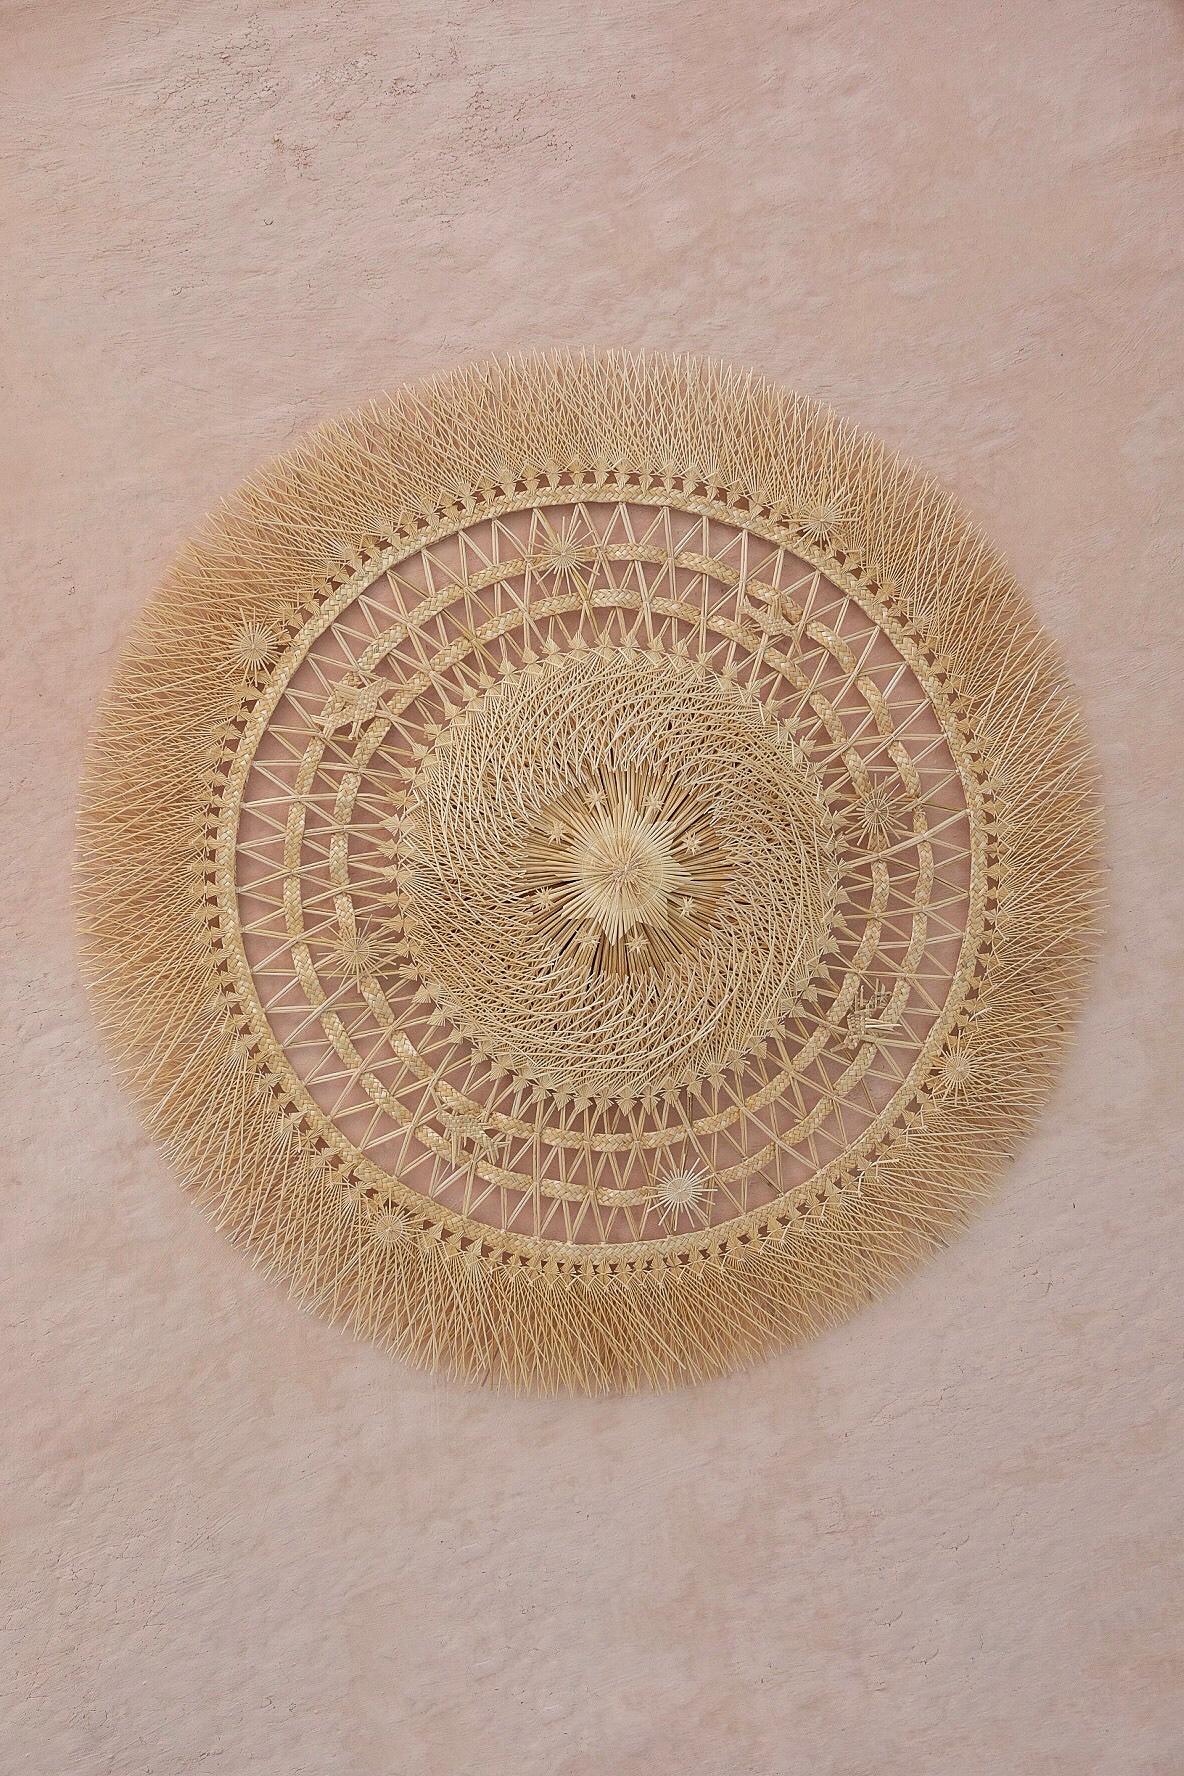 Cornelio Star by Onora
Dimensions: D 93 cm
Materials: Woven wheat fiber

Hand woven by the Tata Curiata workshop, master artisans who received a special mention in the Loewe Craft Prize of 2017 edition. Several hundred strands of wheat fibre are